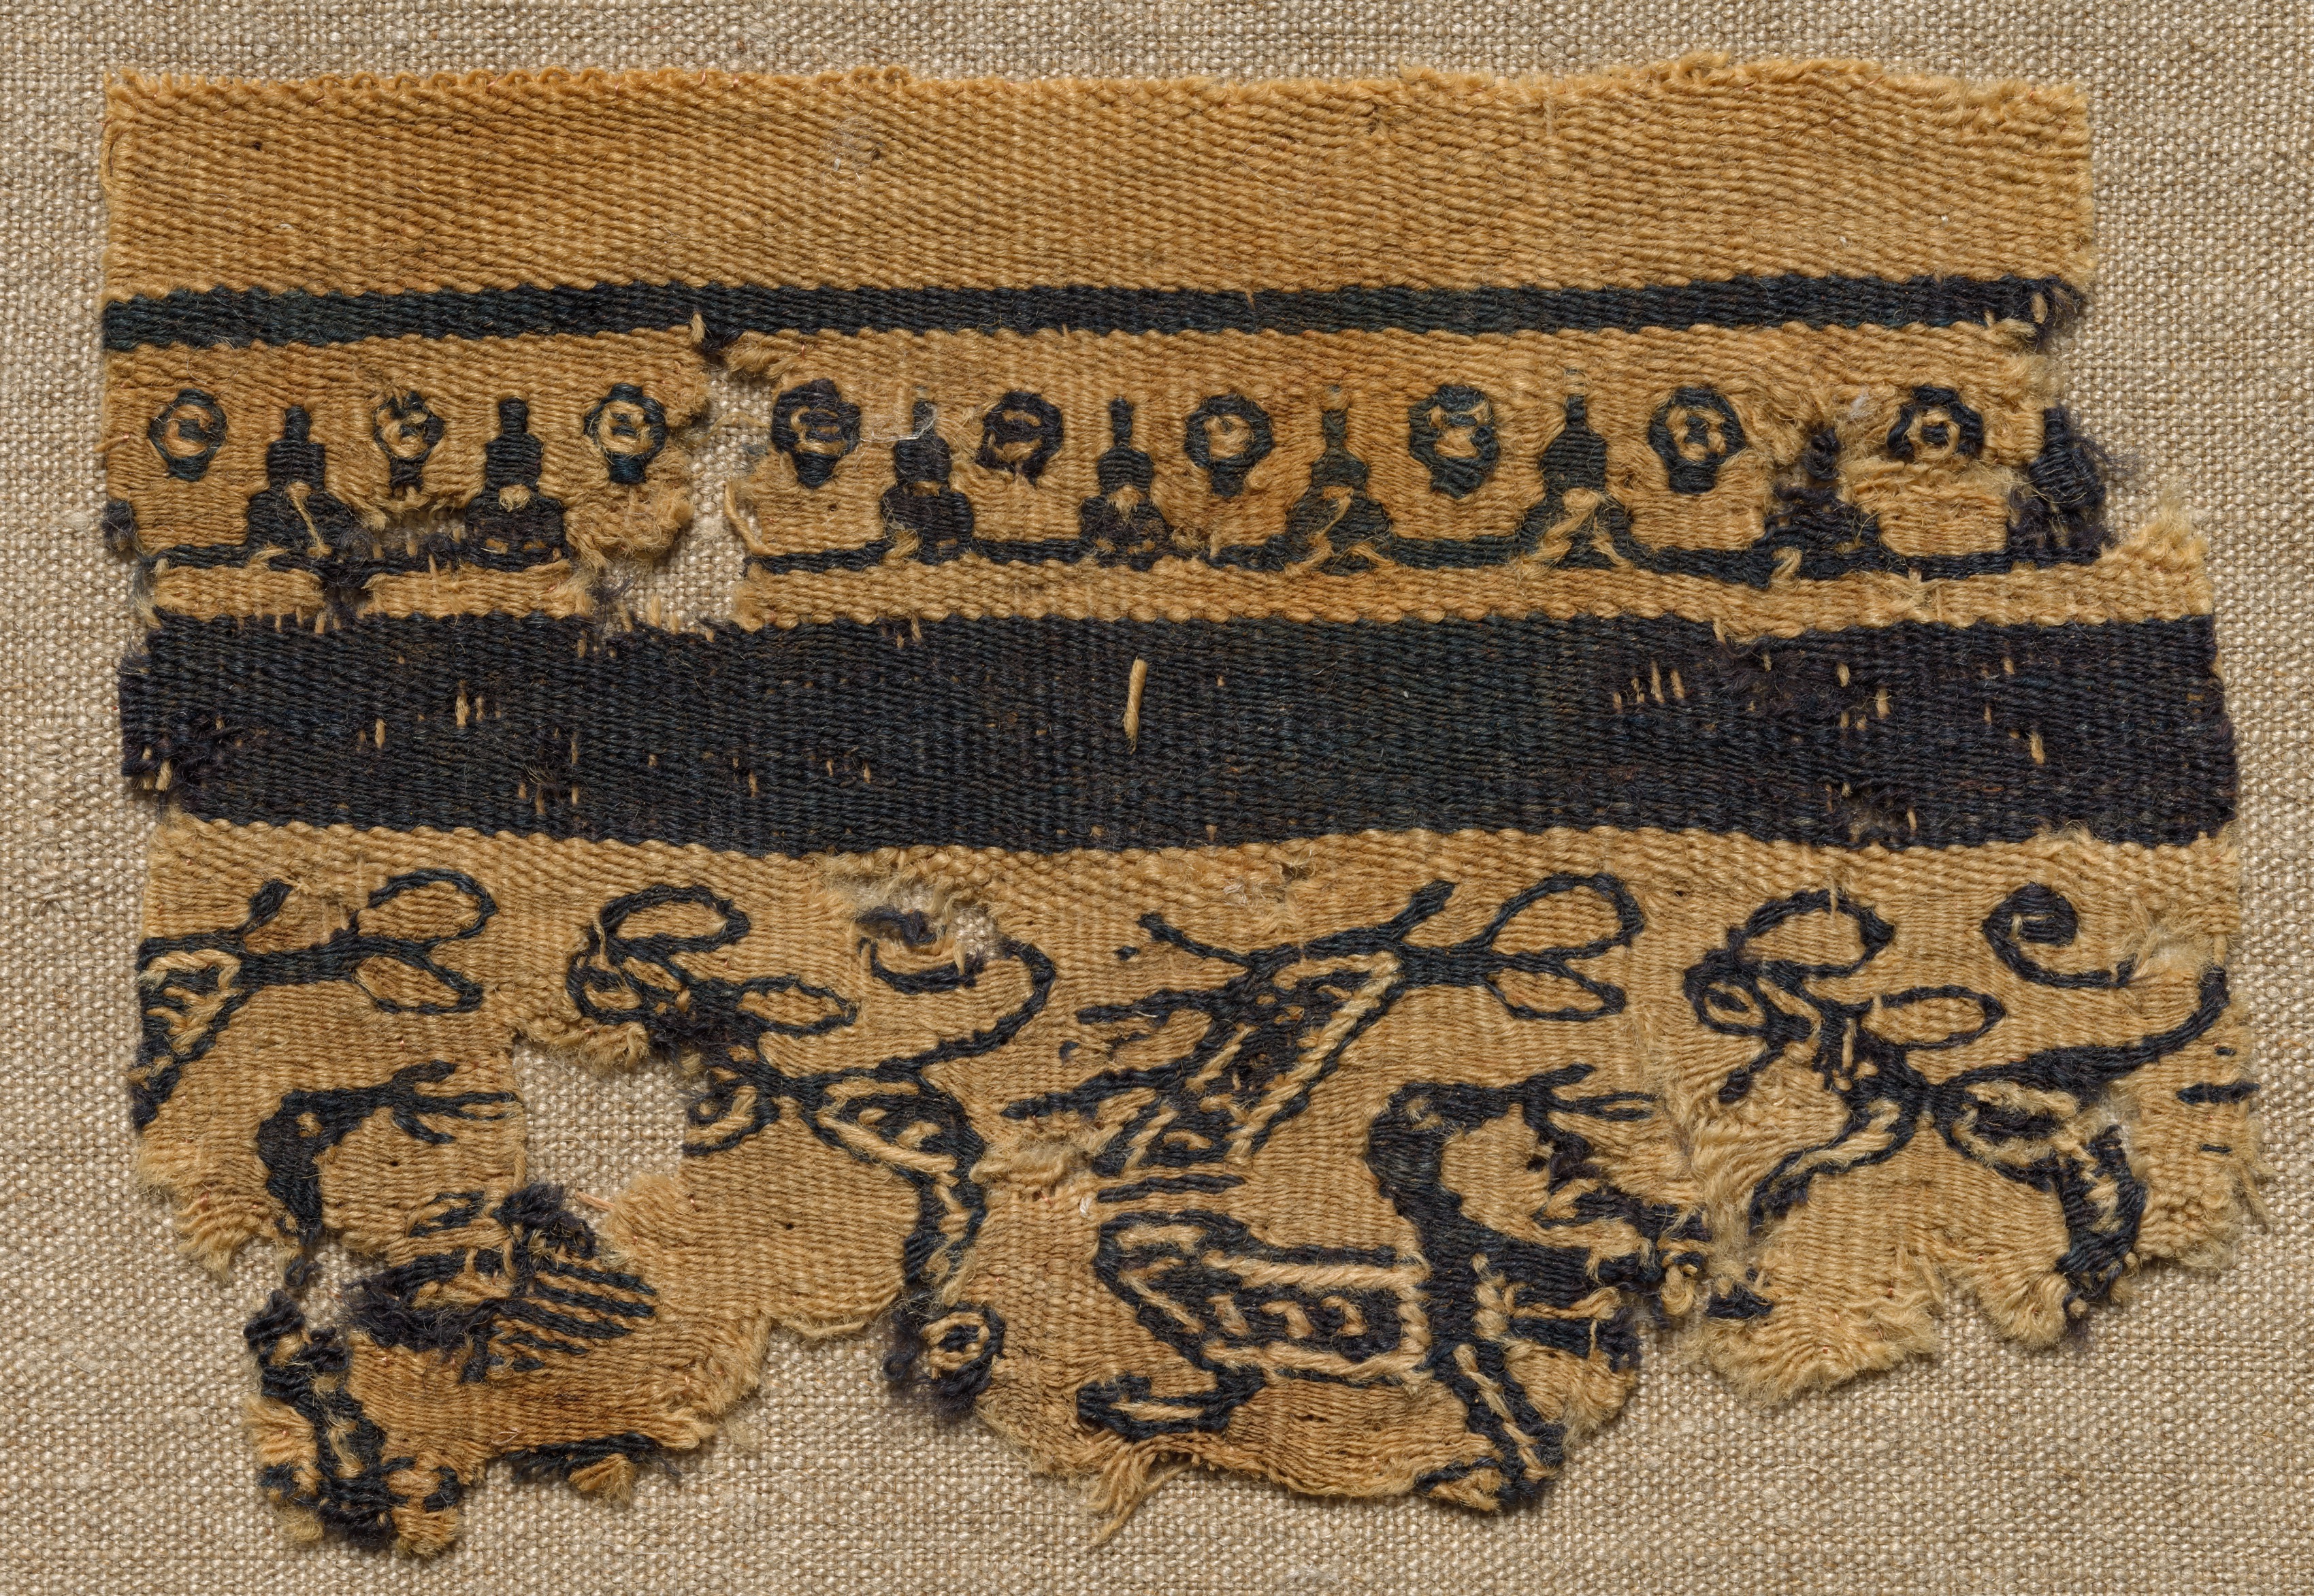 Fragment, with Part of a Clavus, from a Tunic